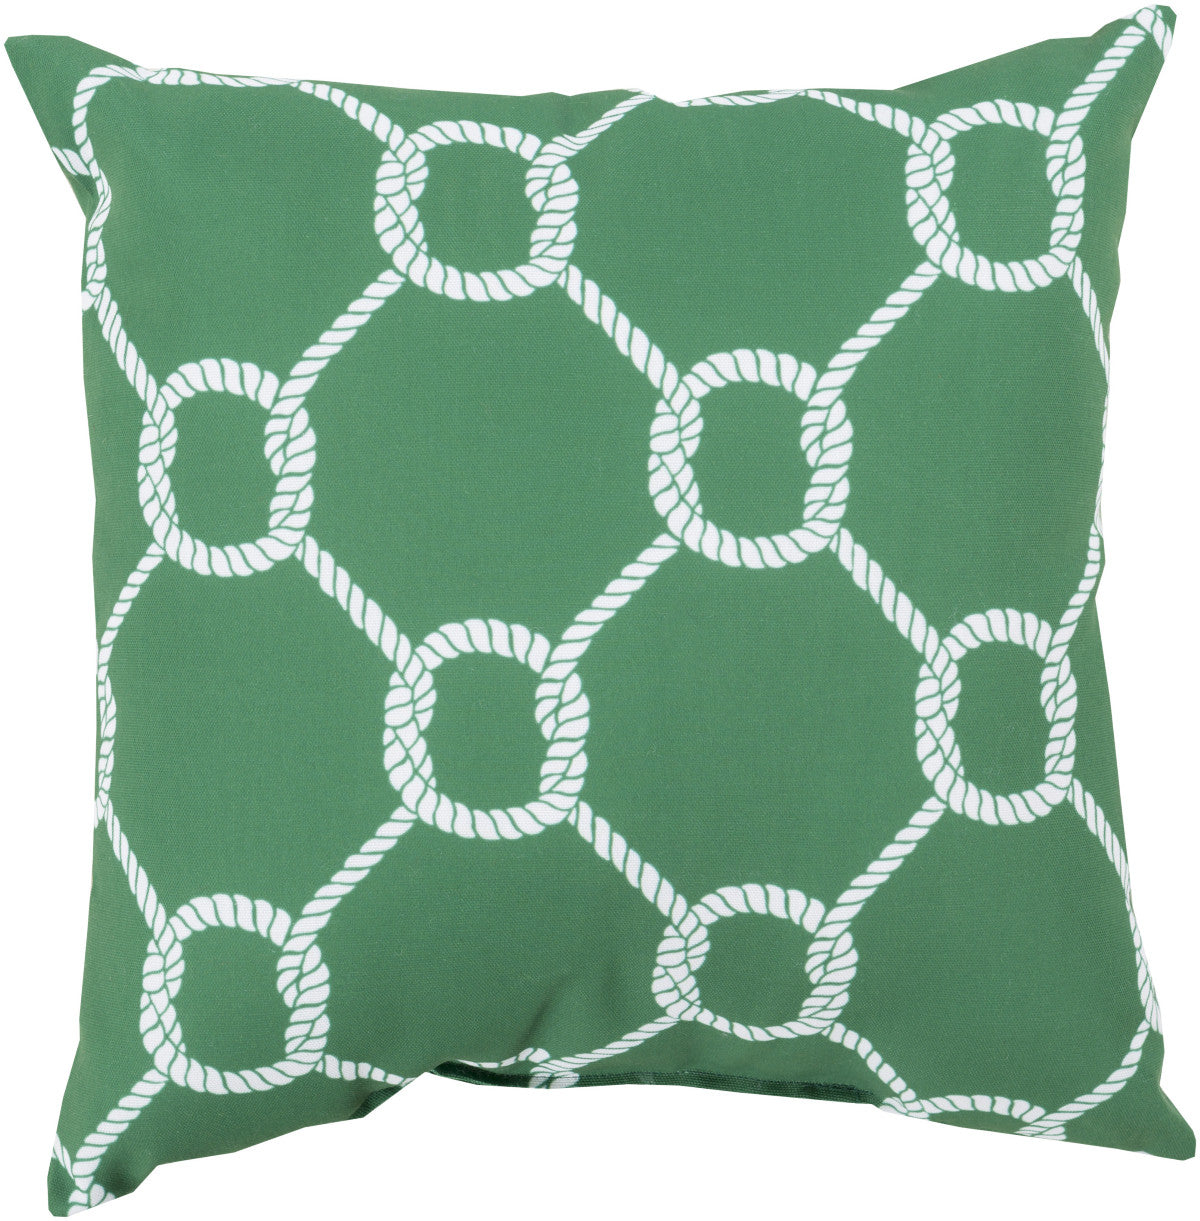 Surya Rain Tied up in Delight RG-143 Pillow